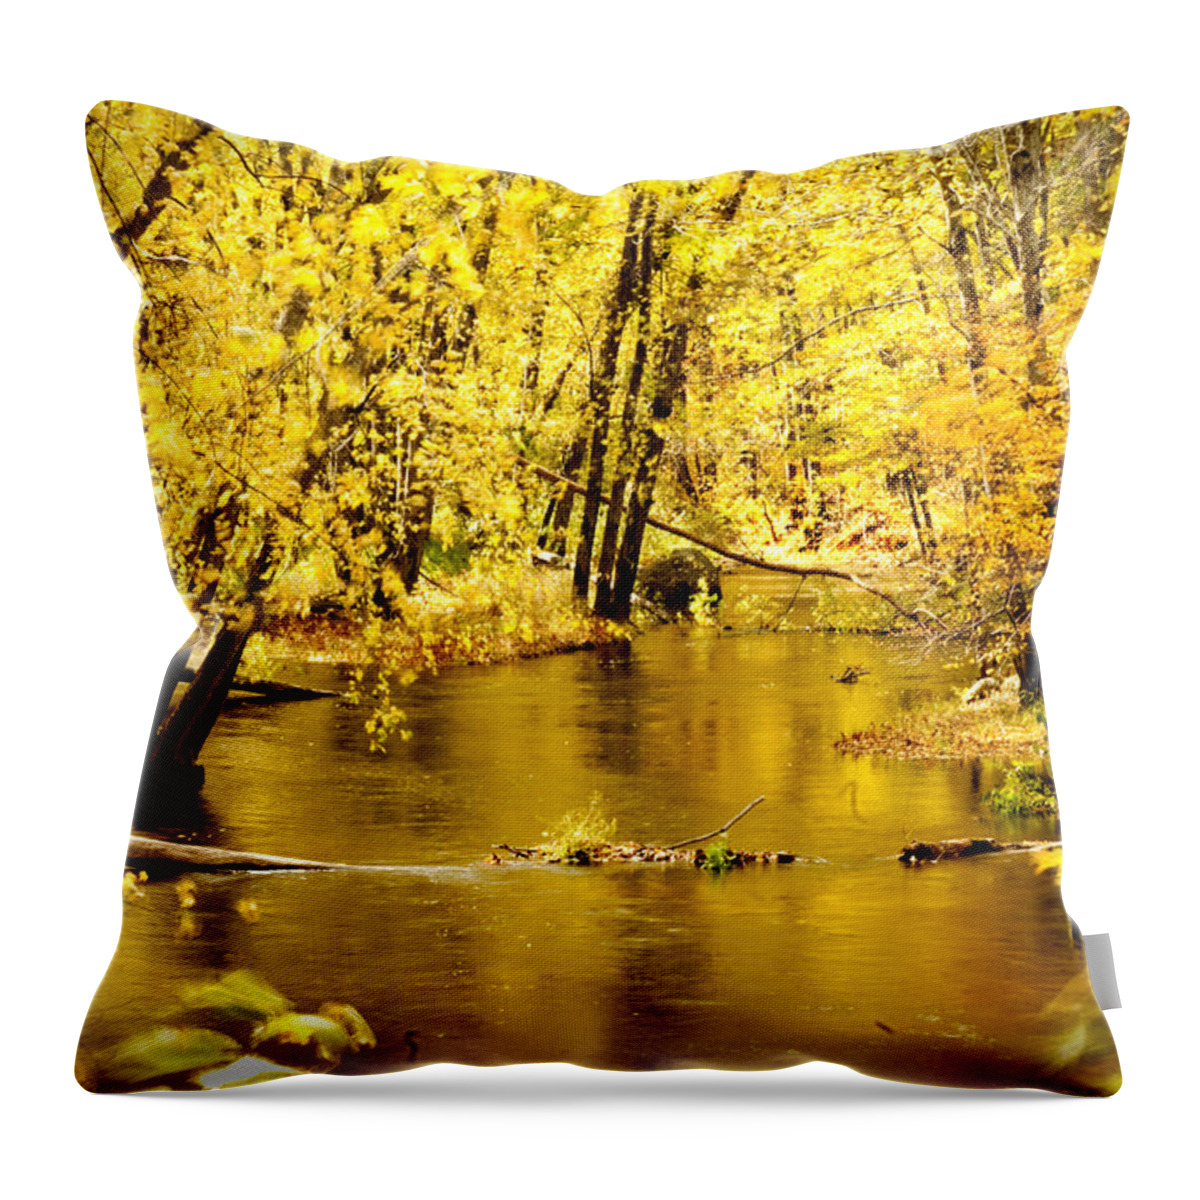 Foliage Throw Pillow featuring the photograph Golden Fall by Greg Fortier